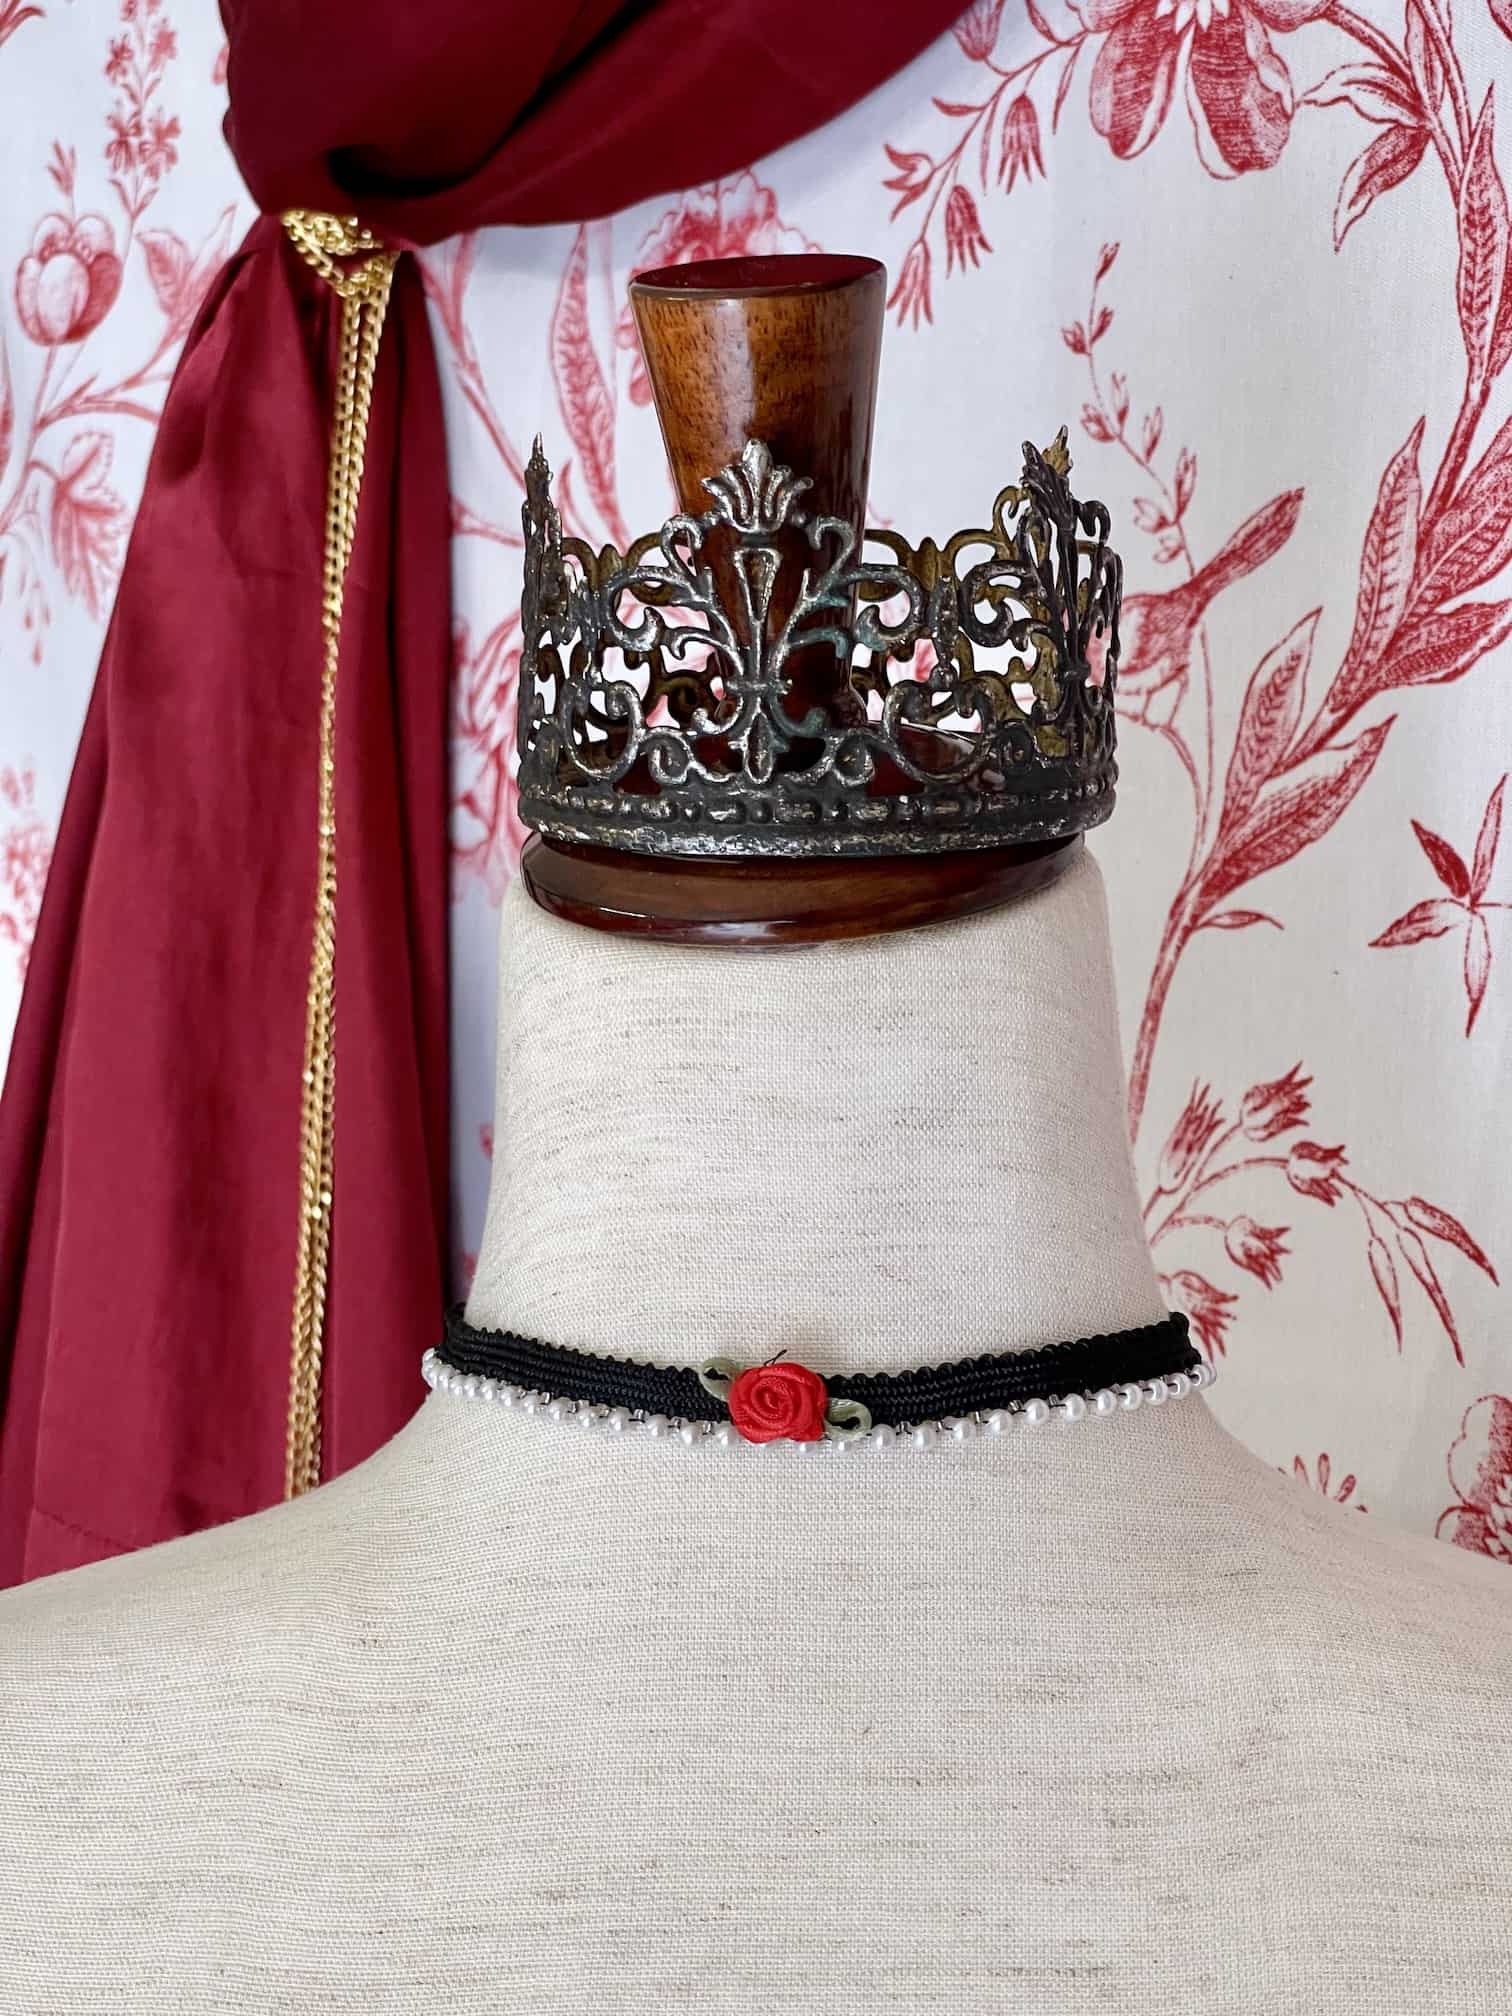 A Handmade Historically Inspired Pearl Lace Choker Necklace in Gothic Black with red rosette applique.